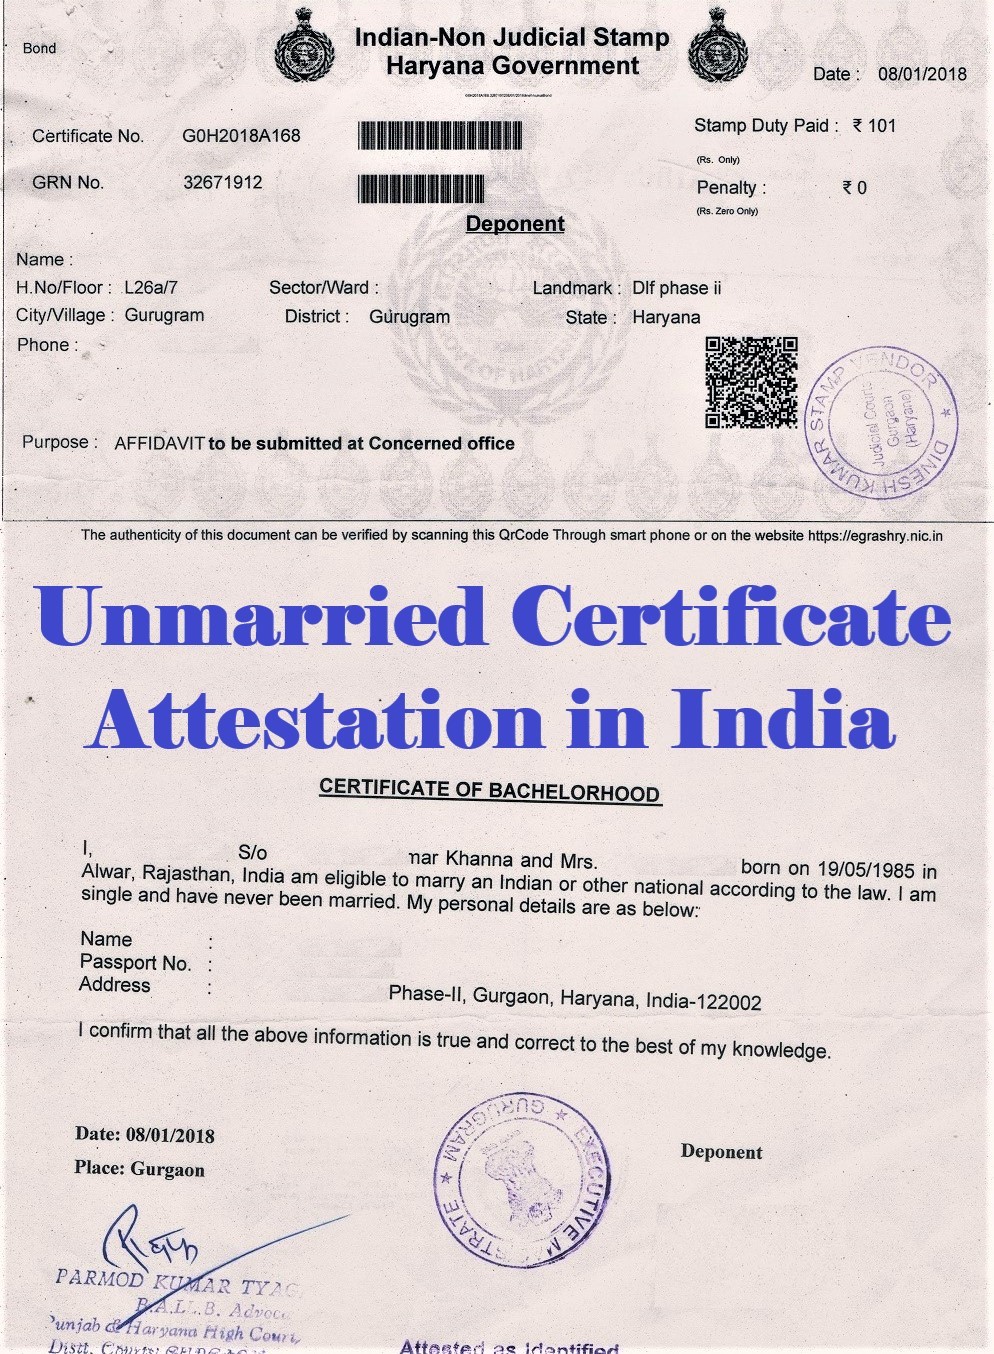 Unmarried Certificate Attestation from Laos Embassy